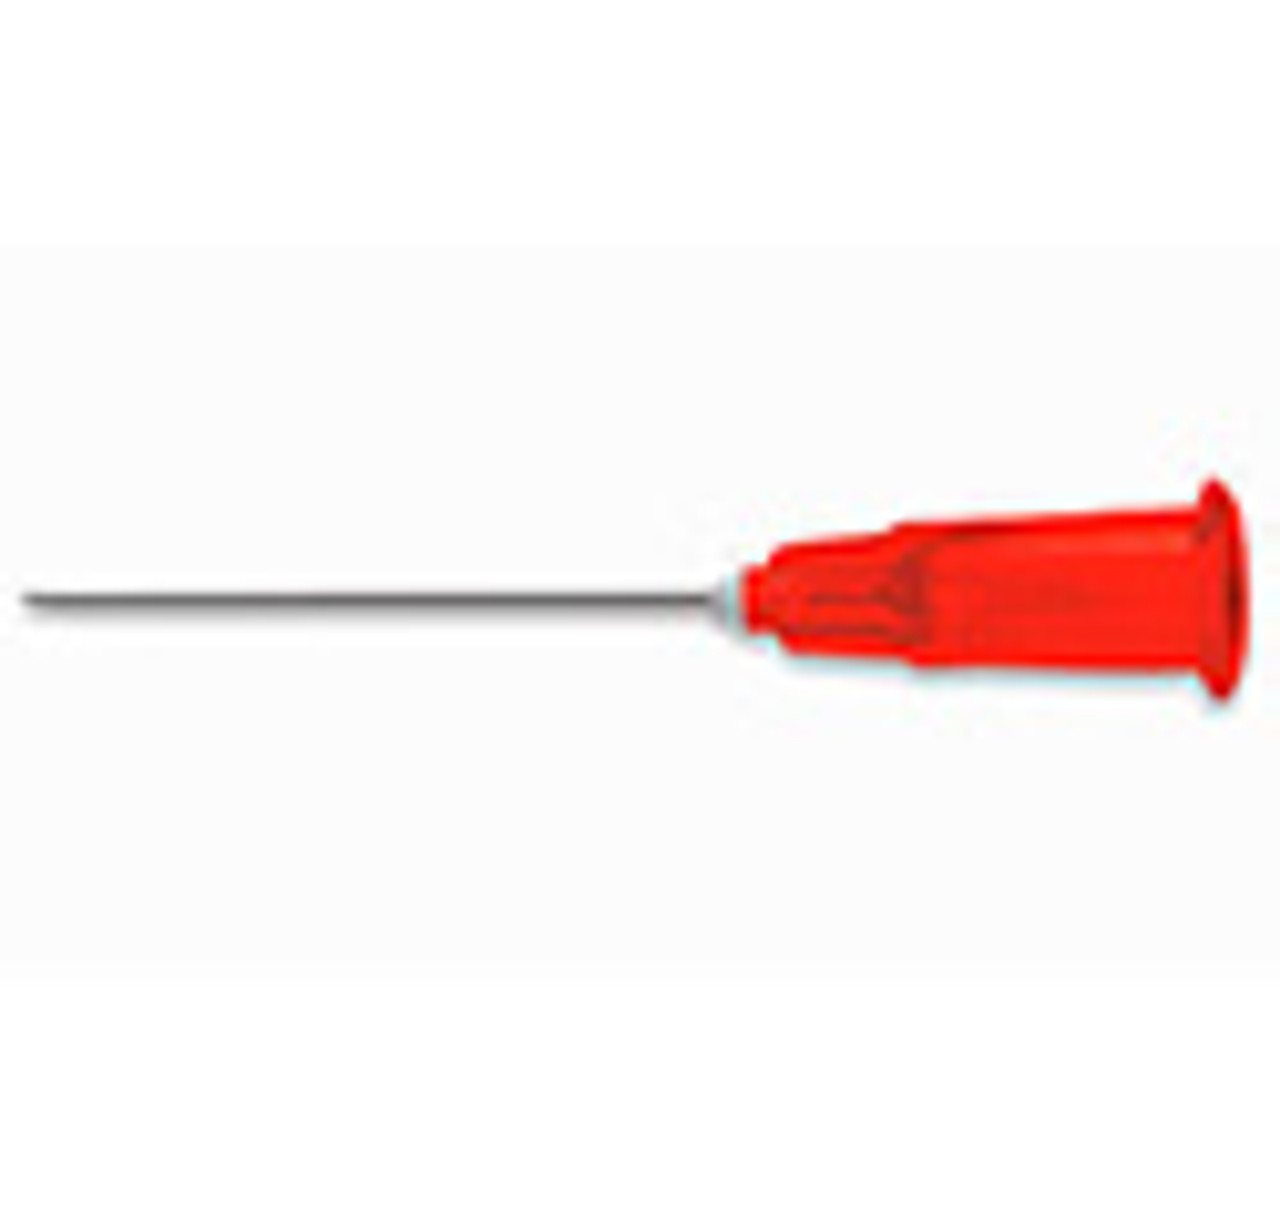 Easy Touch Hypodermic Needle, 25g x 1, Red - DDP Medical Supply